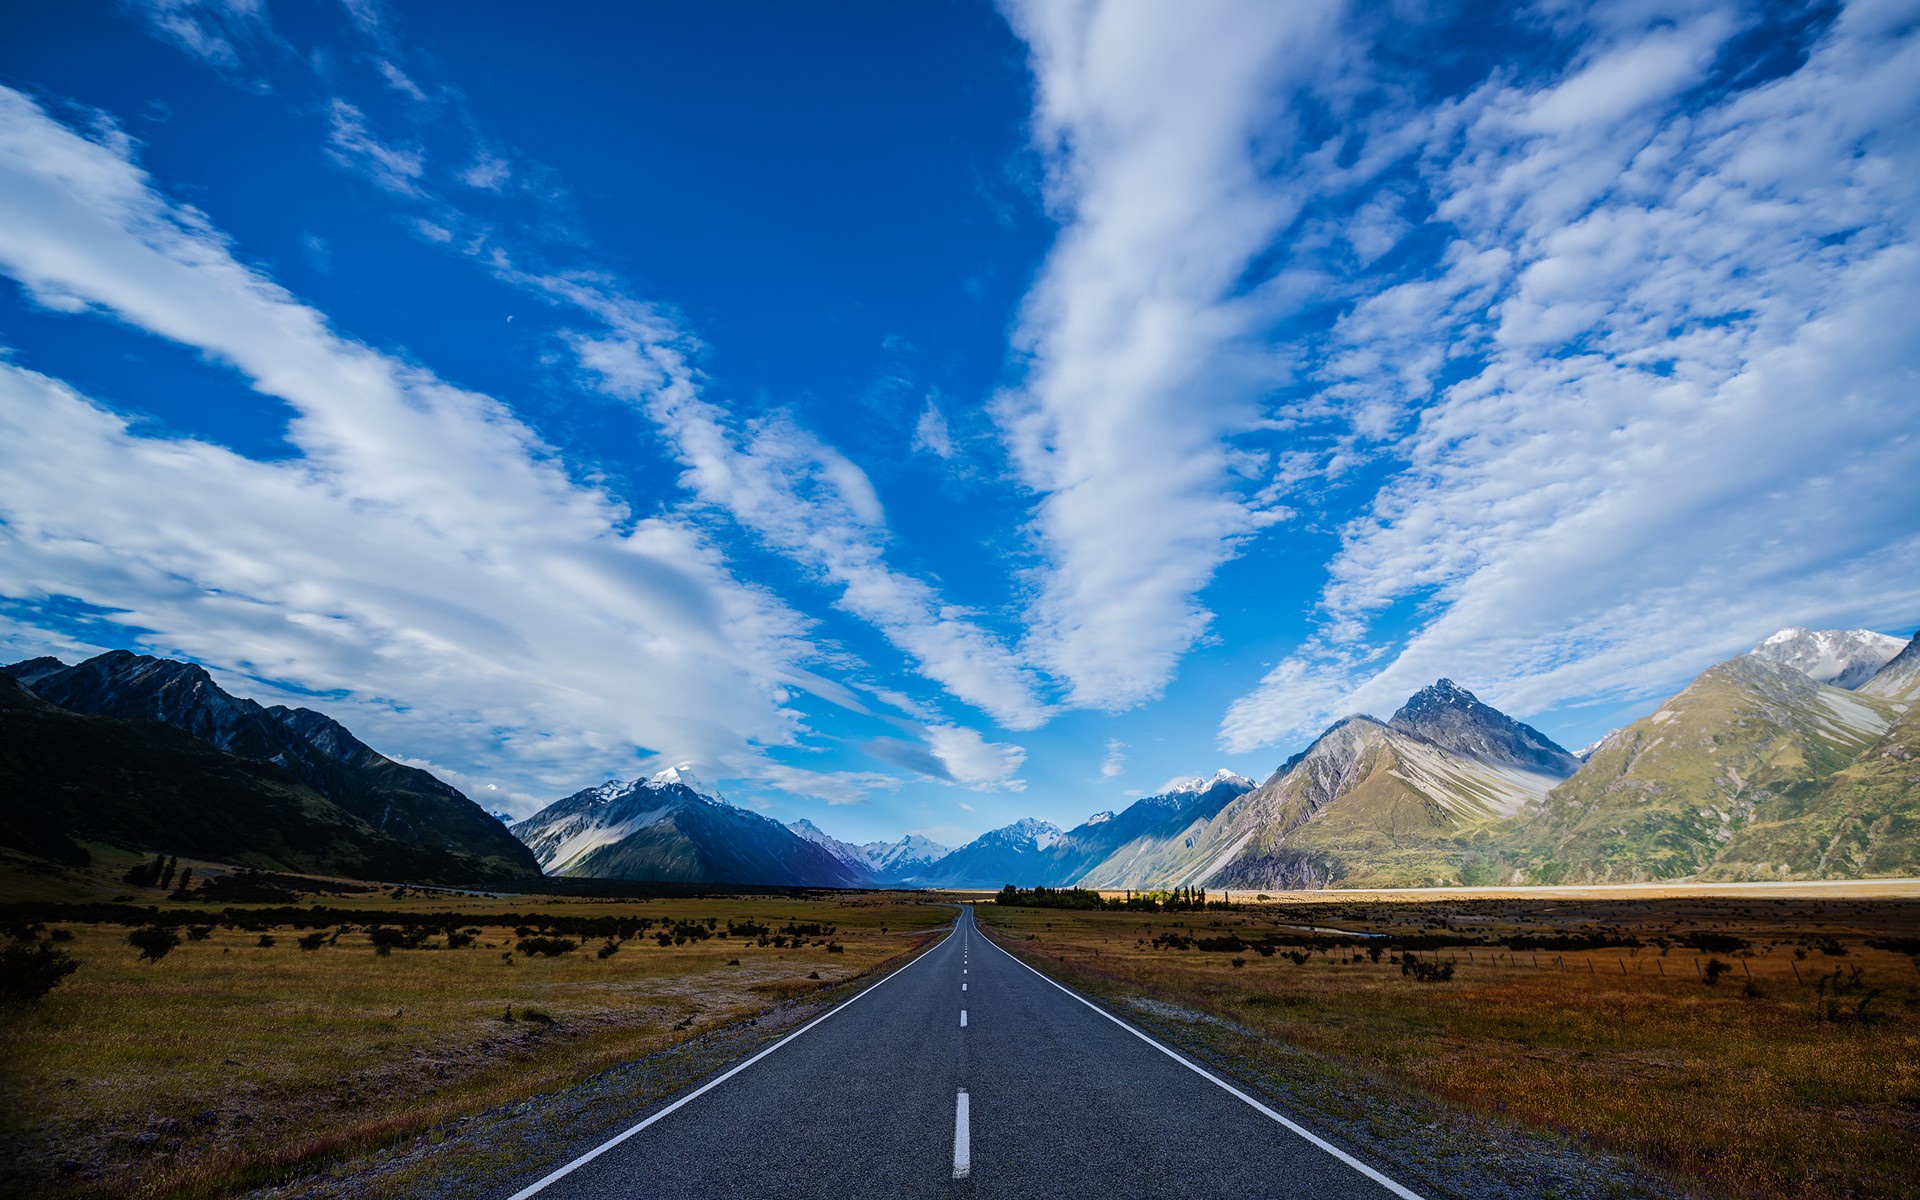 General 1920x1200 nature landscape mountains road clouds trees snowy peak hills grass field New Zealand